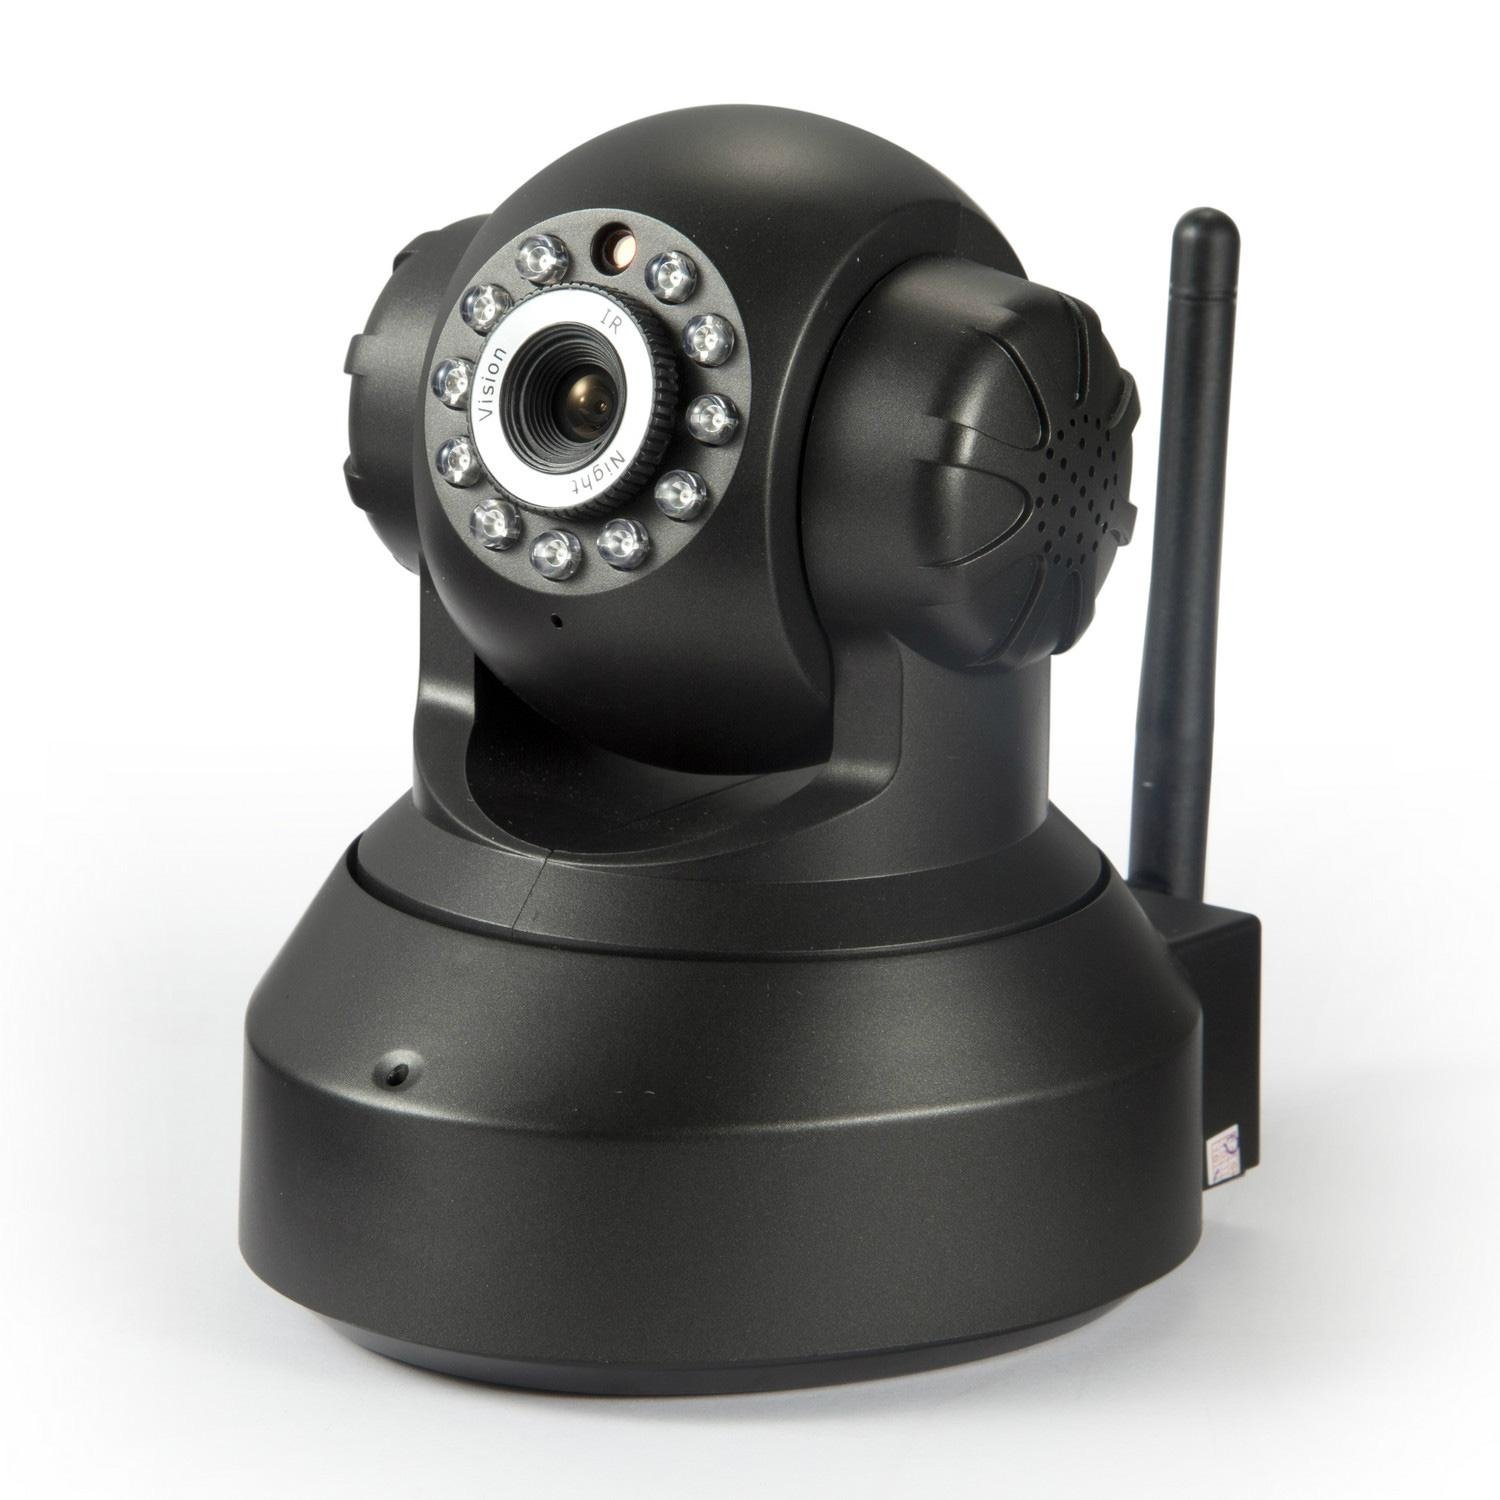 Alytimes Aly002 720p baby cam wifi ip camera 4